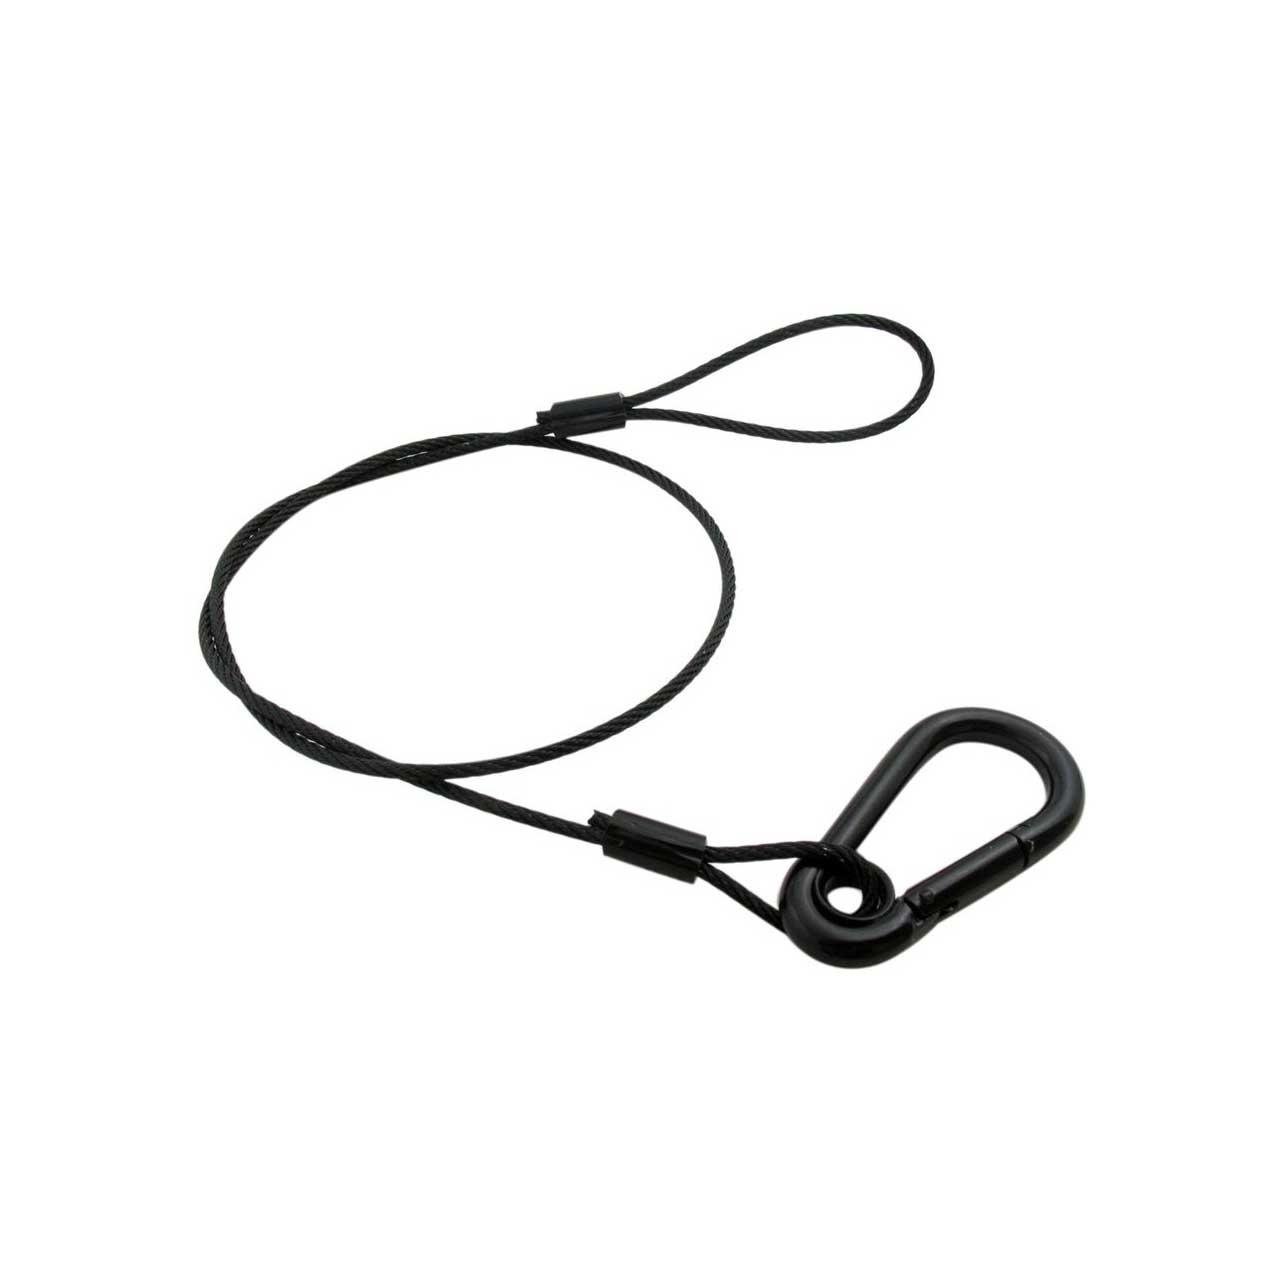 SAFE-2 30 Inch Black Safety Cable with 5/16 Inch Springhook